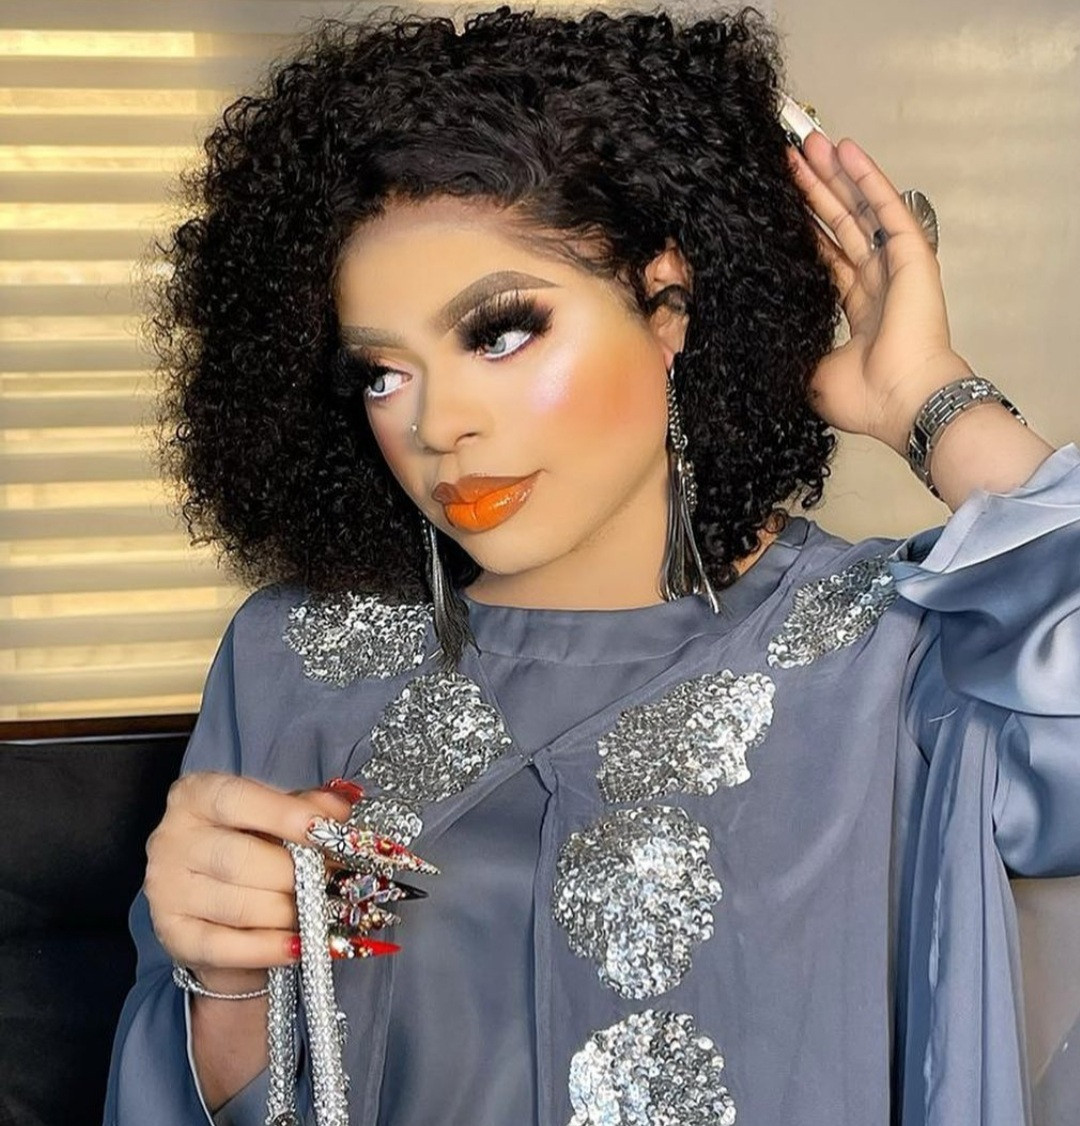 360 lipo is damn painful I want my life back - Bobrisky writes after alleged plastic surgery